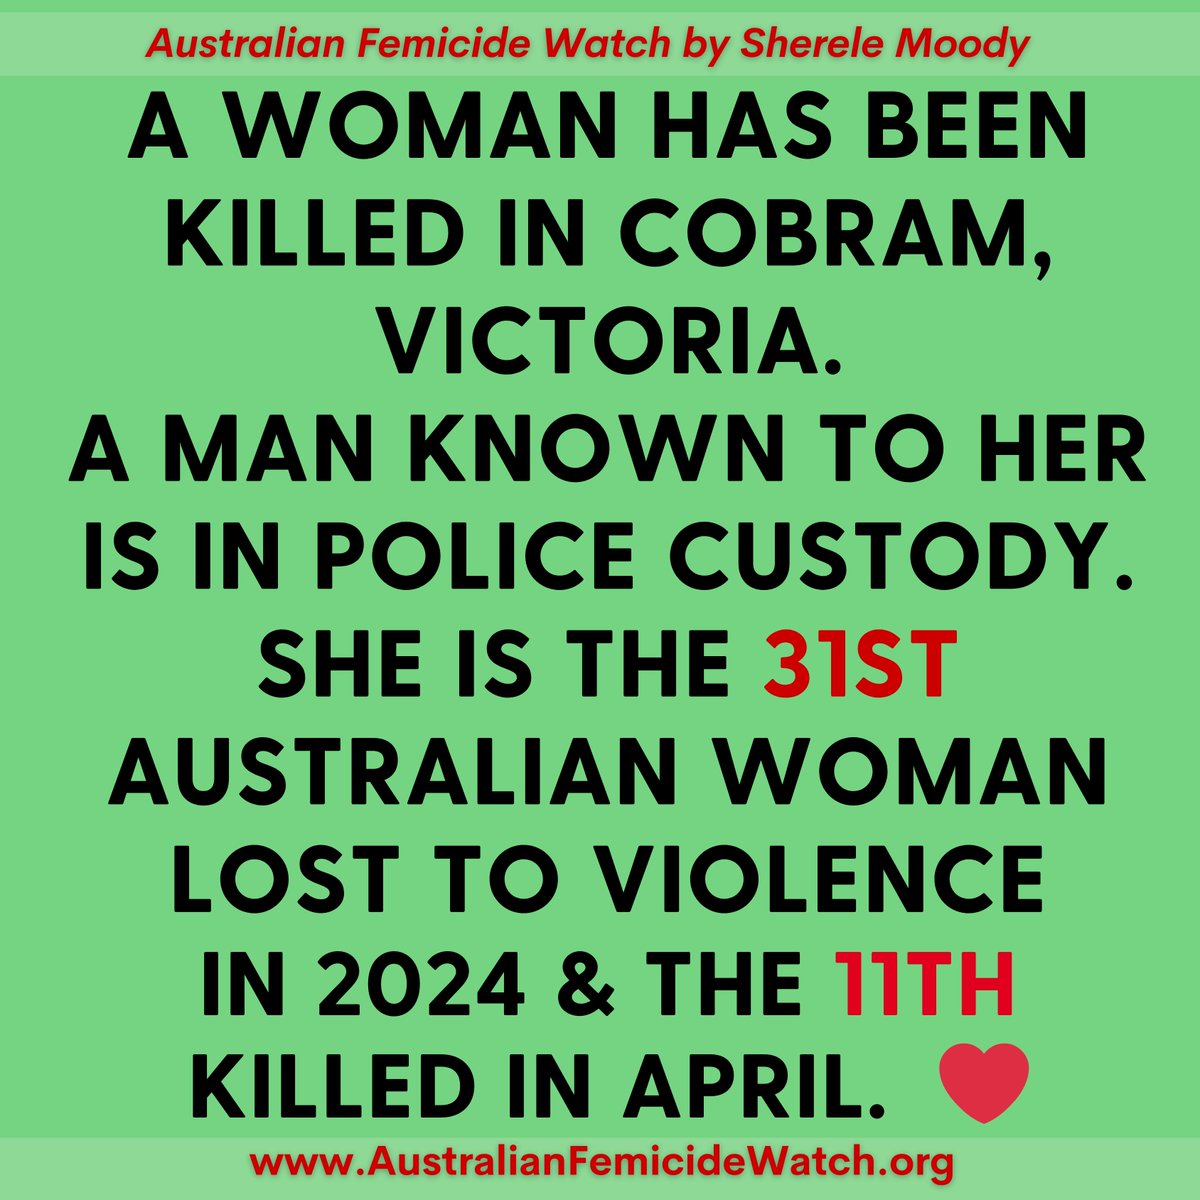 For the 31st time this year - and the 11th time this month - I'm sadly and maddingly reporting another woman killed. A 49-year-old woman has been killed in a home at Cobram in Victoria. A man known to her is in custody and assisting police. She is the 31st woman killed this